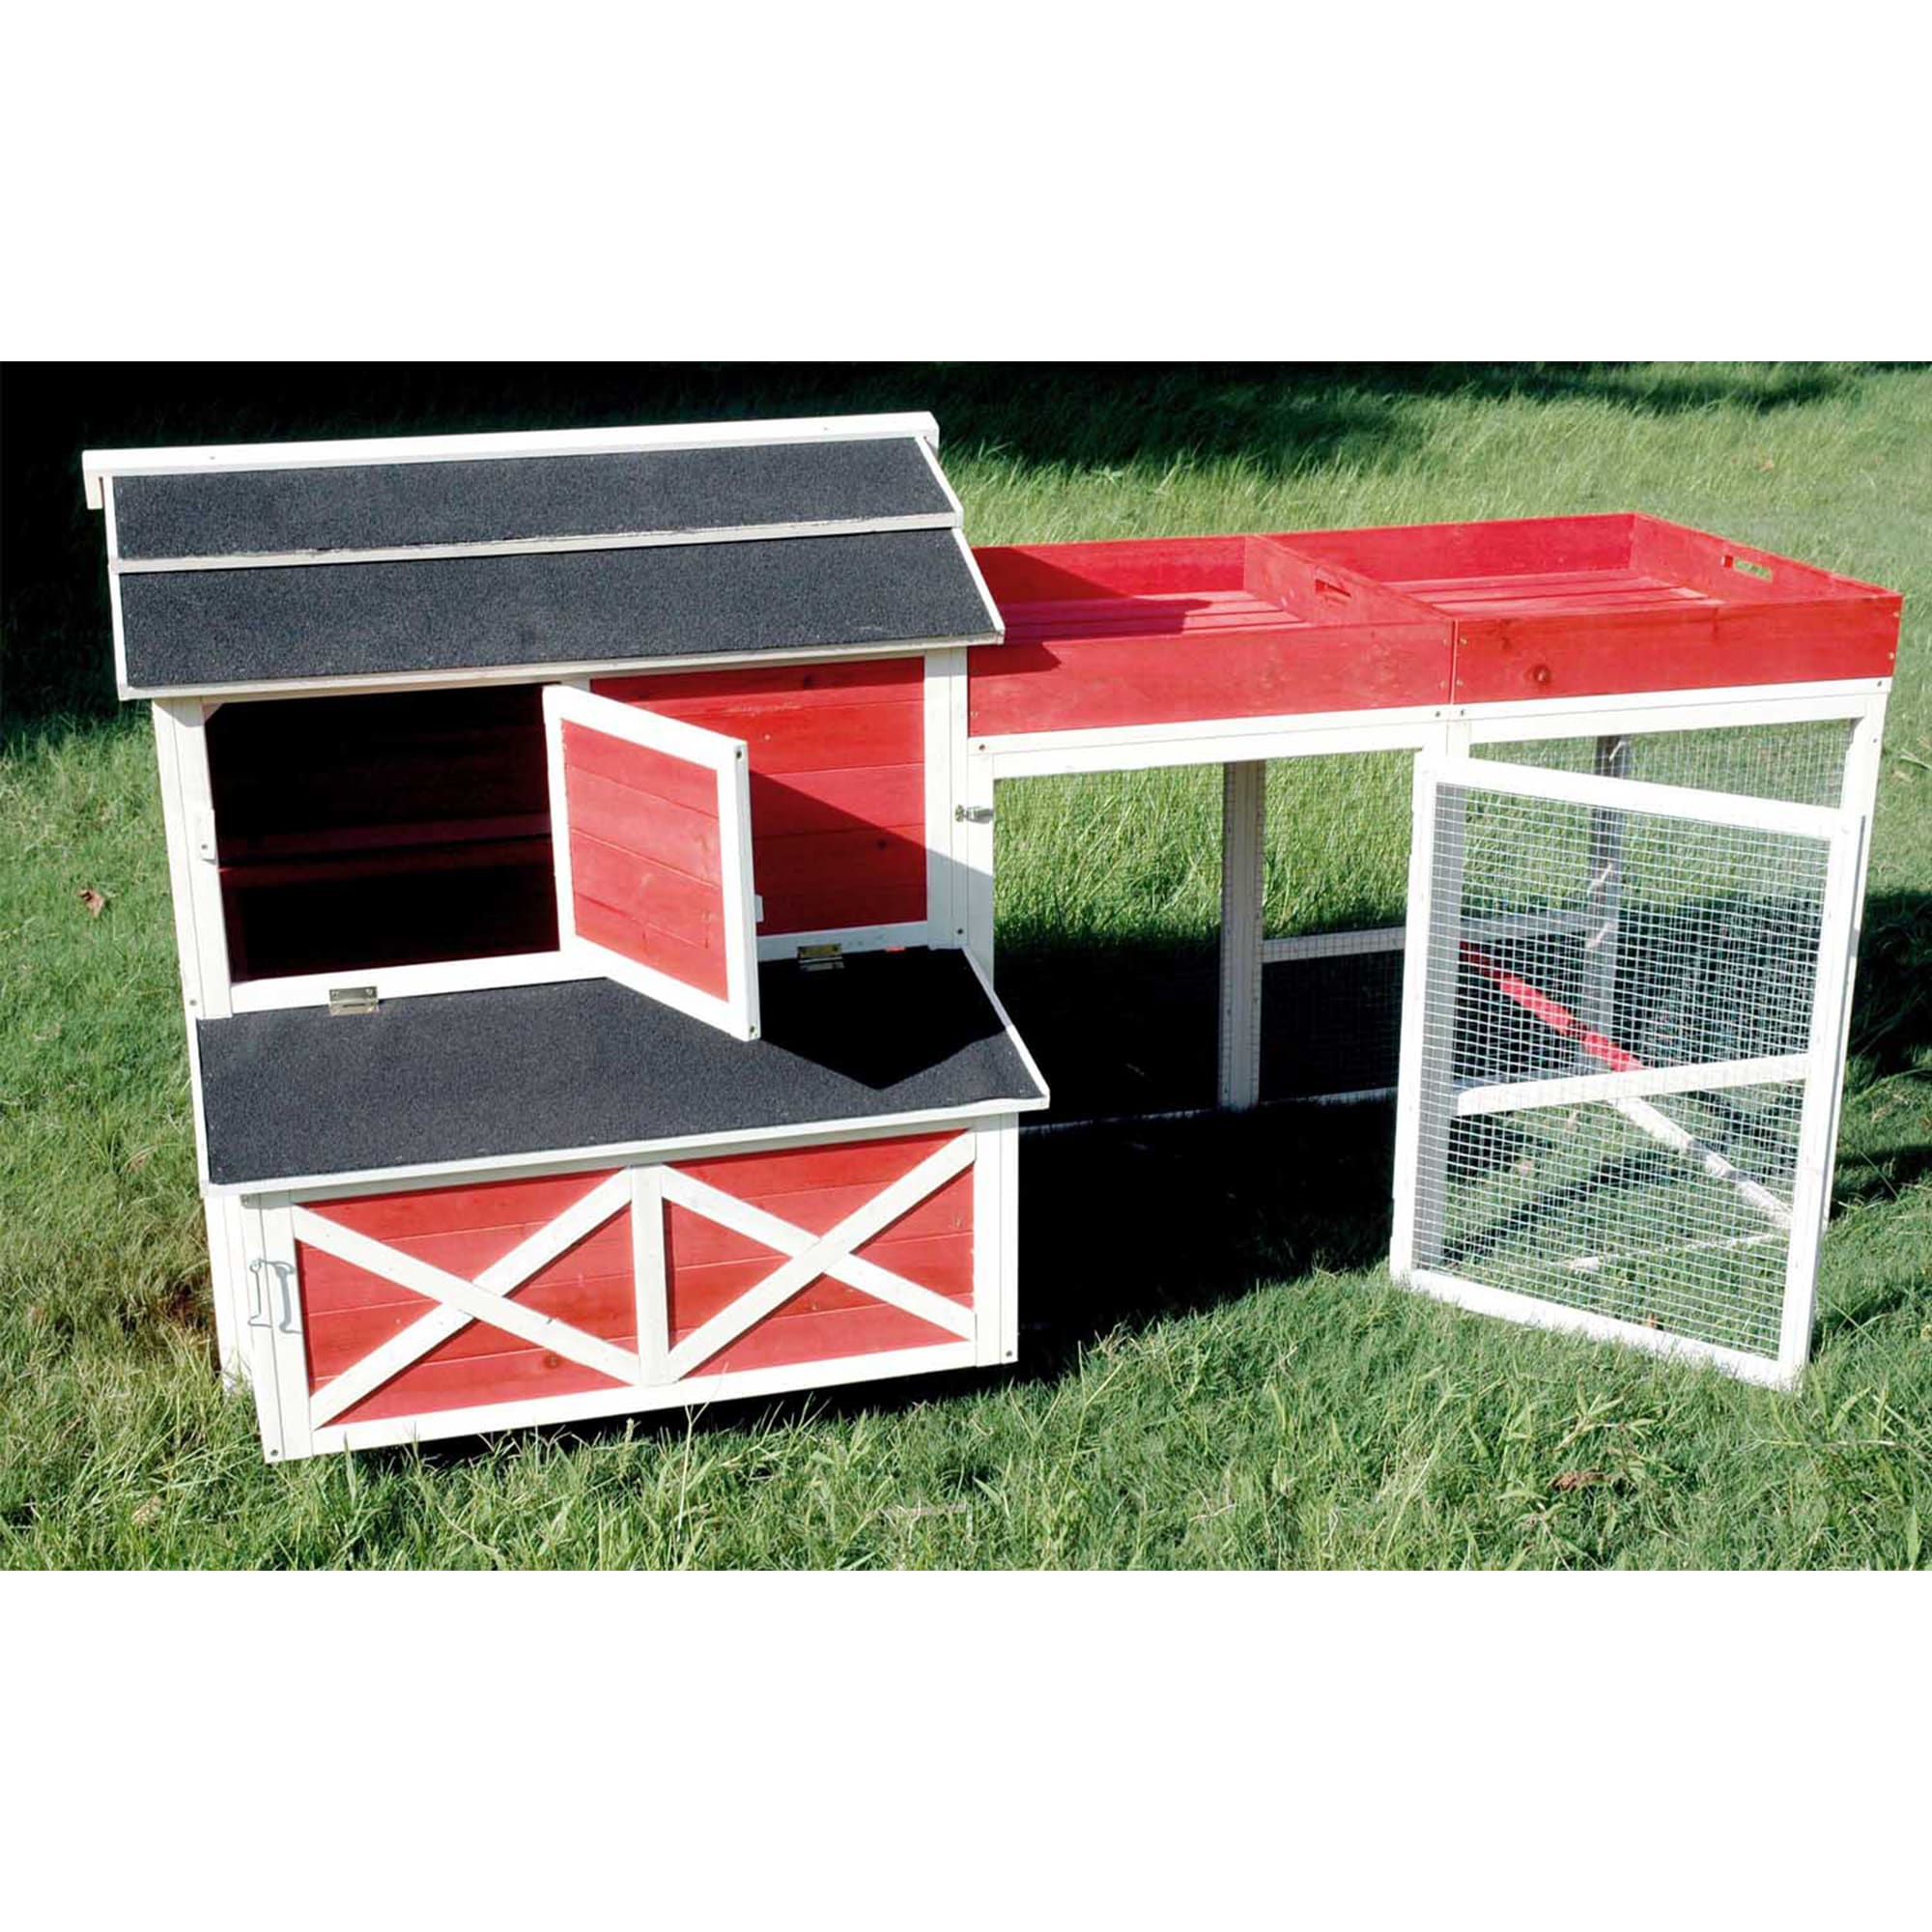 Photos - Other Pet Supplies Merry Products Merry Products Red Barn Chicken Coops with Roof Top Planter